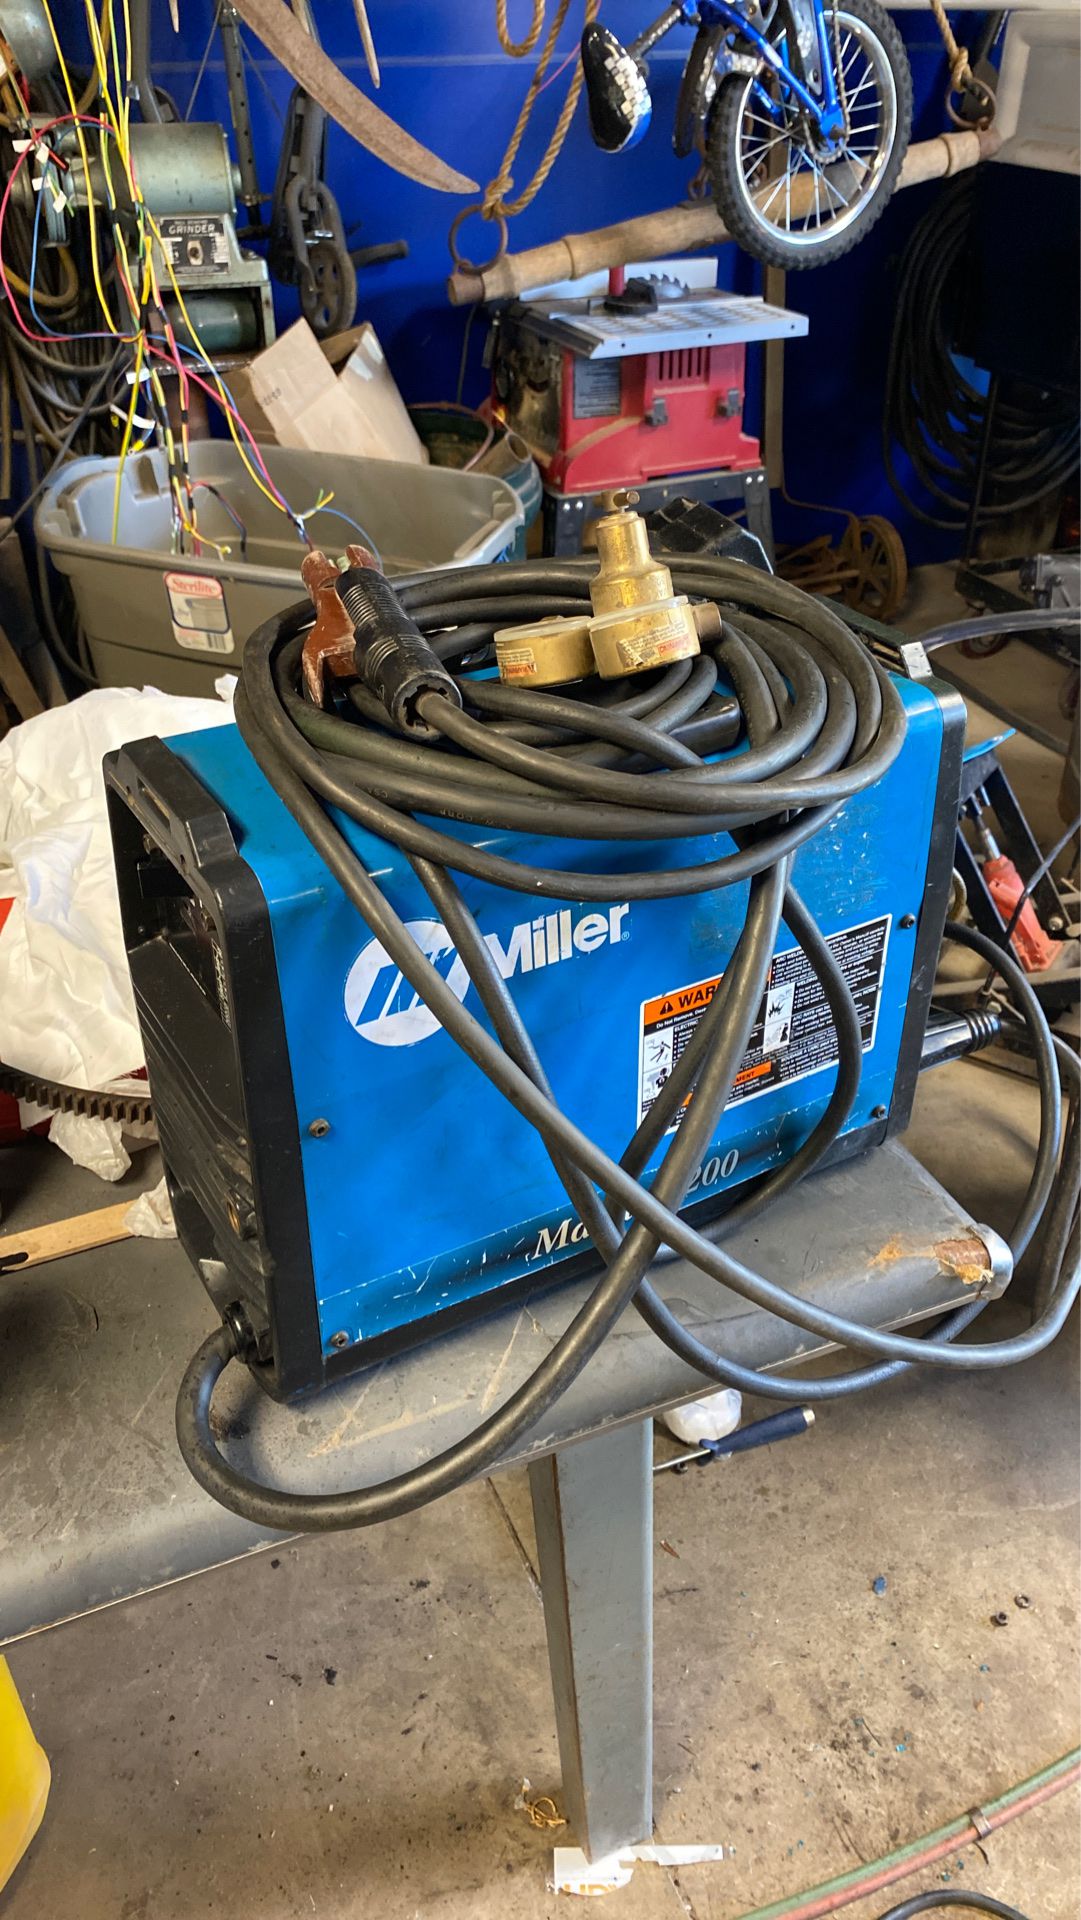 MILLLER MAXSTAR 200 WELDER (with all cords)